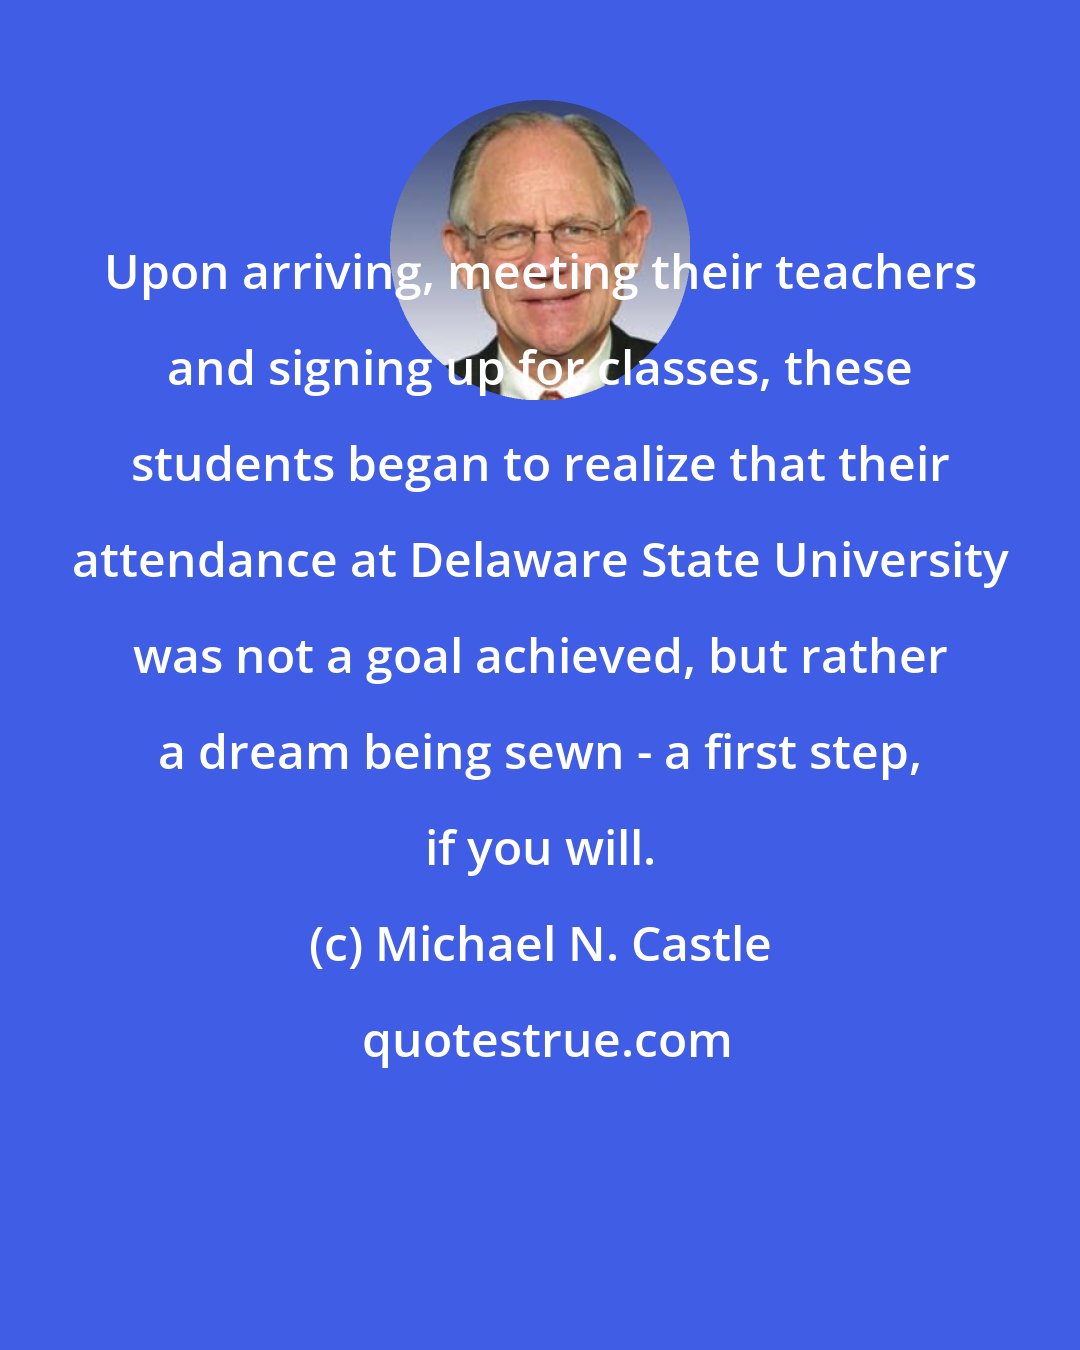 Michael N. Castle: Upon arriving, meeting their teachers and signing up for classes, these students began to realize that their attendance at Delaware State University was not a goal achieved, but rather a dream being sewn - a first step, if you will.